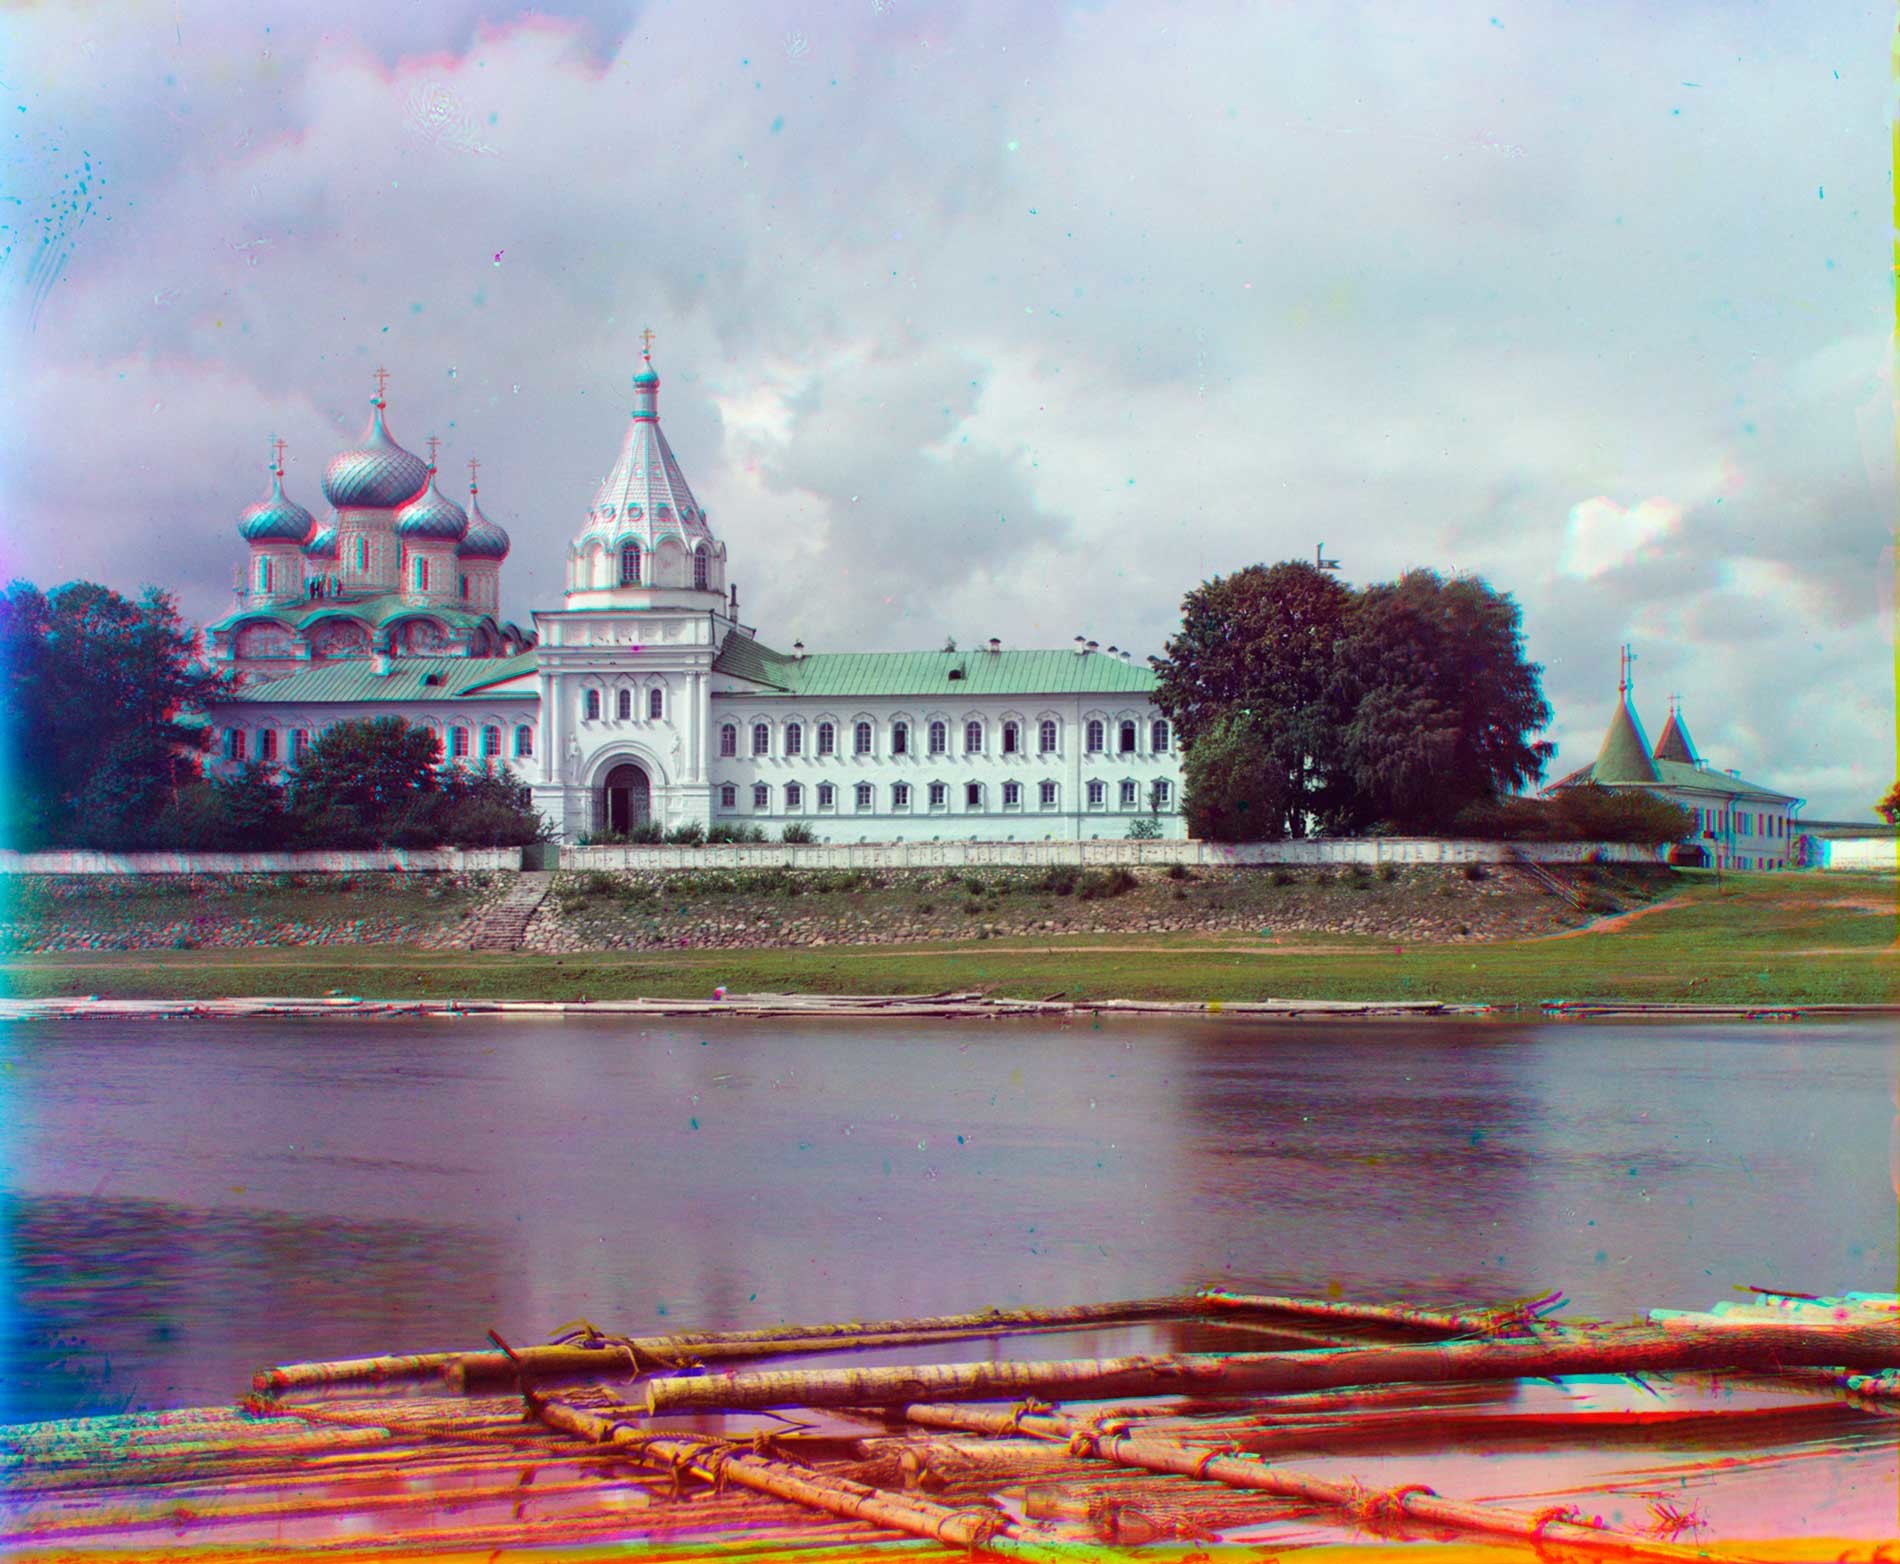 Trinity-Ipatiev Monastery, east view across Kostroma River. From left: Trinity Cathedral; bell tower; Archbishop's Cloisters with Gate Church of Sts. Chrysanthus & Daria; Powder Tower. Summer 1911.